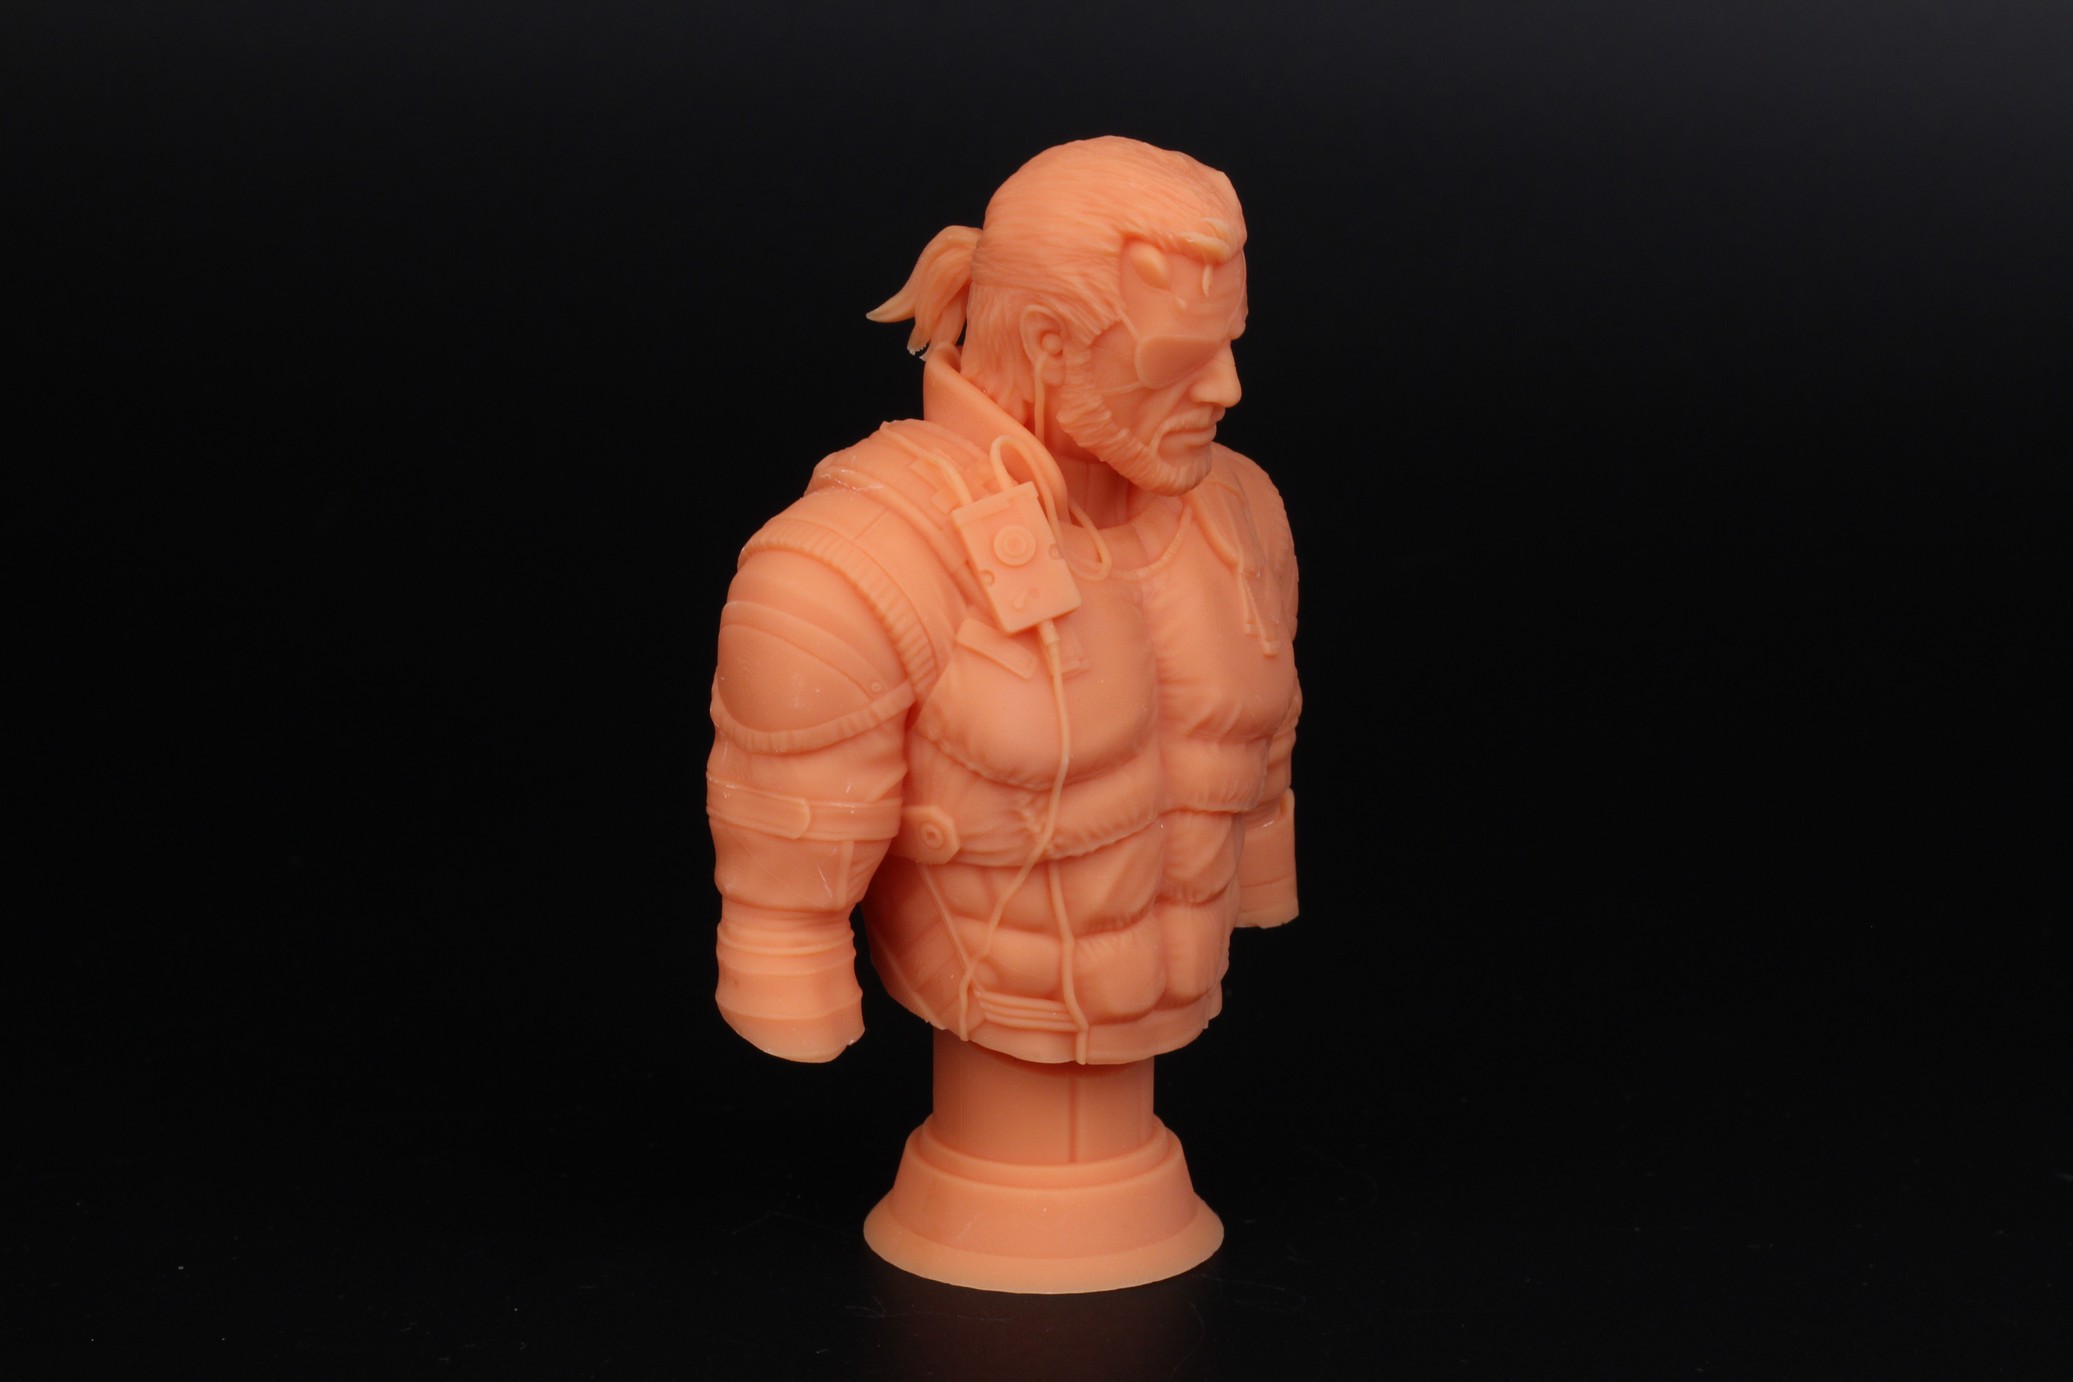 Venom Snake Bust printed on Anycubic Photon M3 Max 1 | Anycubic Photon M3 Max Review: Who Needs FDM Anymore?